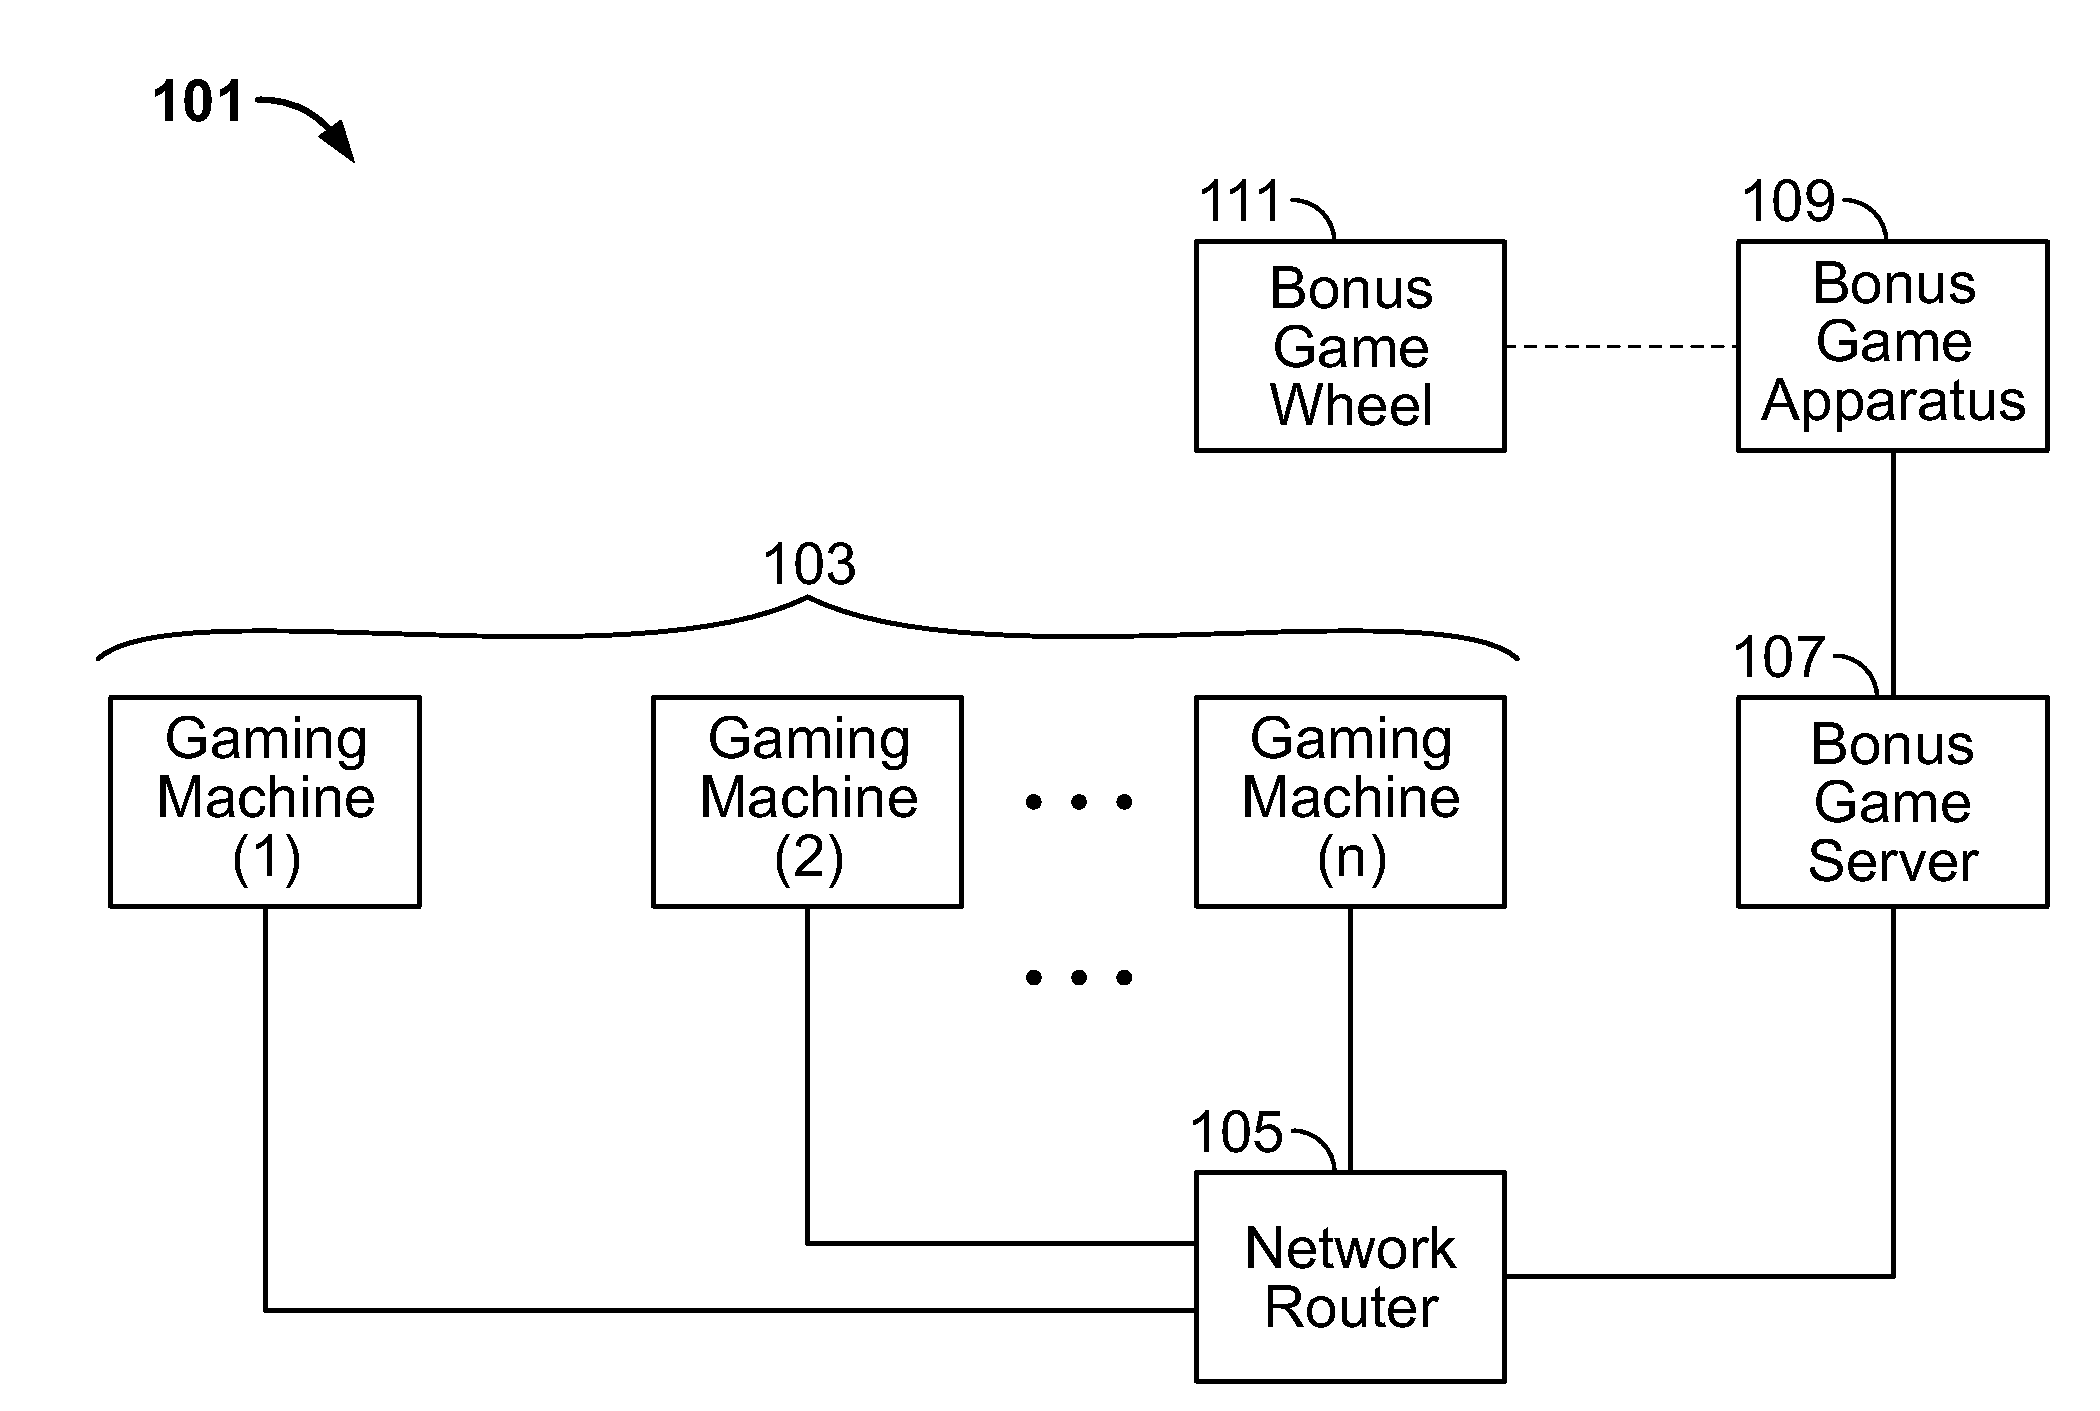 System and Method of an Interactive Multiple Participant Game